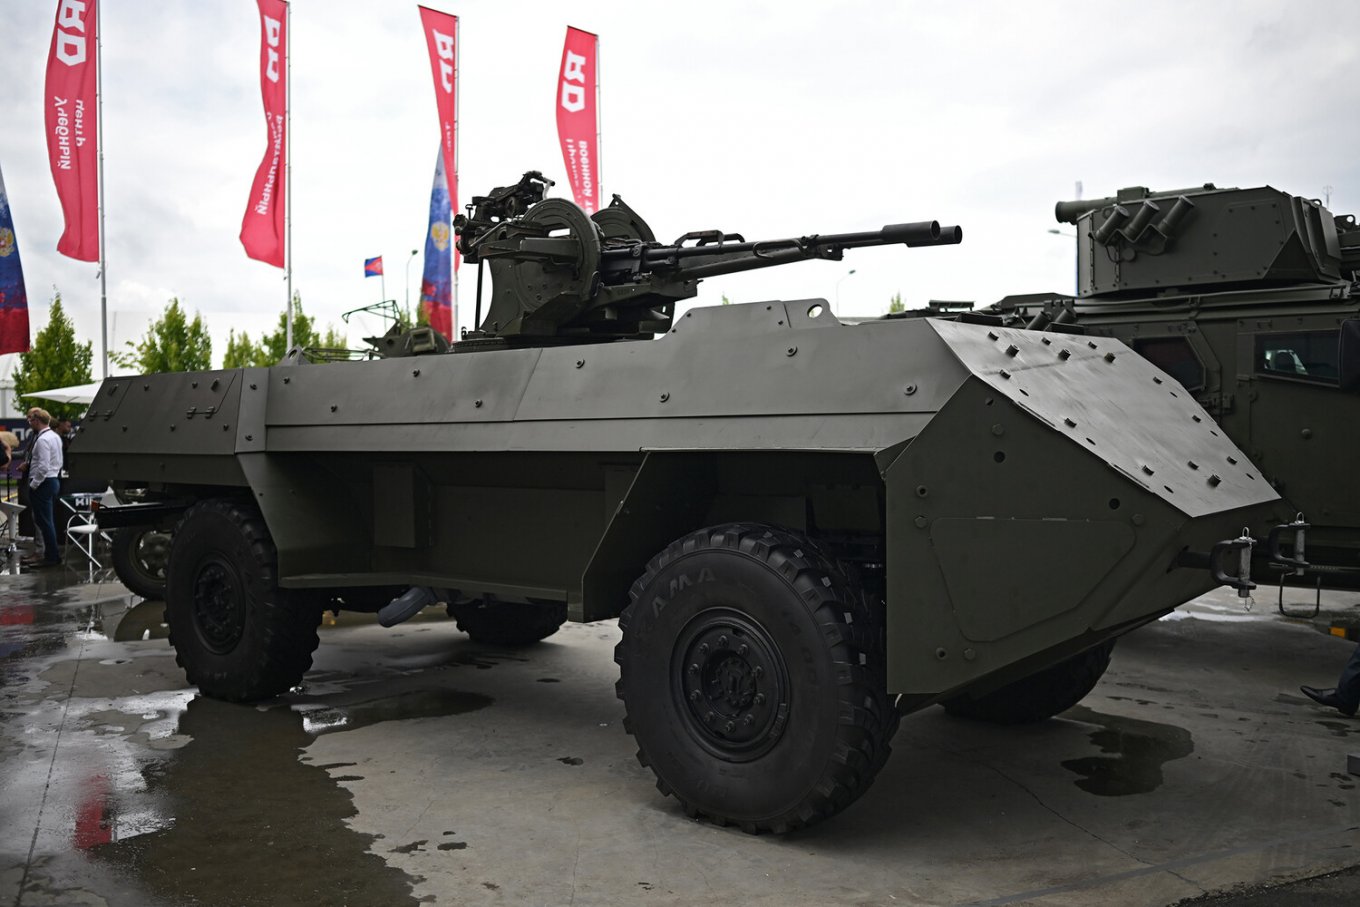 The Zubilo unmanned ground vehicle at Armiya-2023 military forum in russia